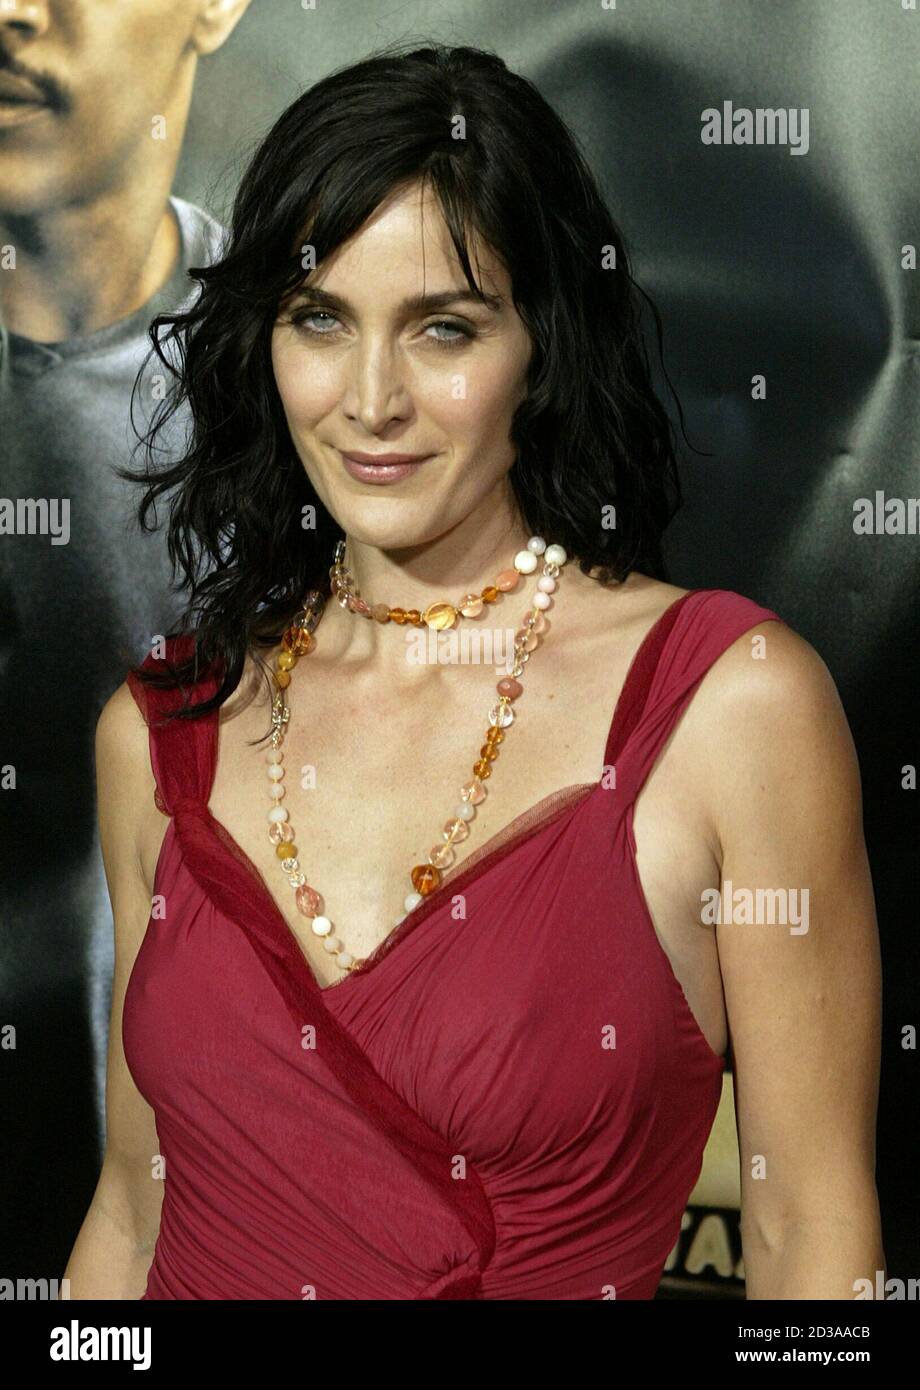 Actress Carrie Anne Moss arrives as a guest for the premiere of the new thriller film 'Collateral'in Los Angeles August 2, 2004. [The film tells the story of a cab driver, played by Jamie Foxx, who finds himself the hostage of an engaging contract killer, played by Tom Cruise, as he makes his rounds from hit to hit during one night in Los Angeles. The film, directed by Michael Mann opens August 6 in the United States.] Stock Photo